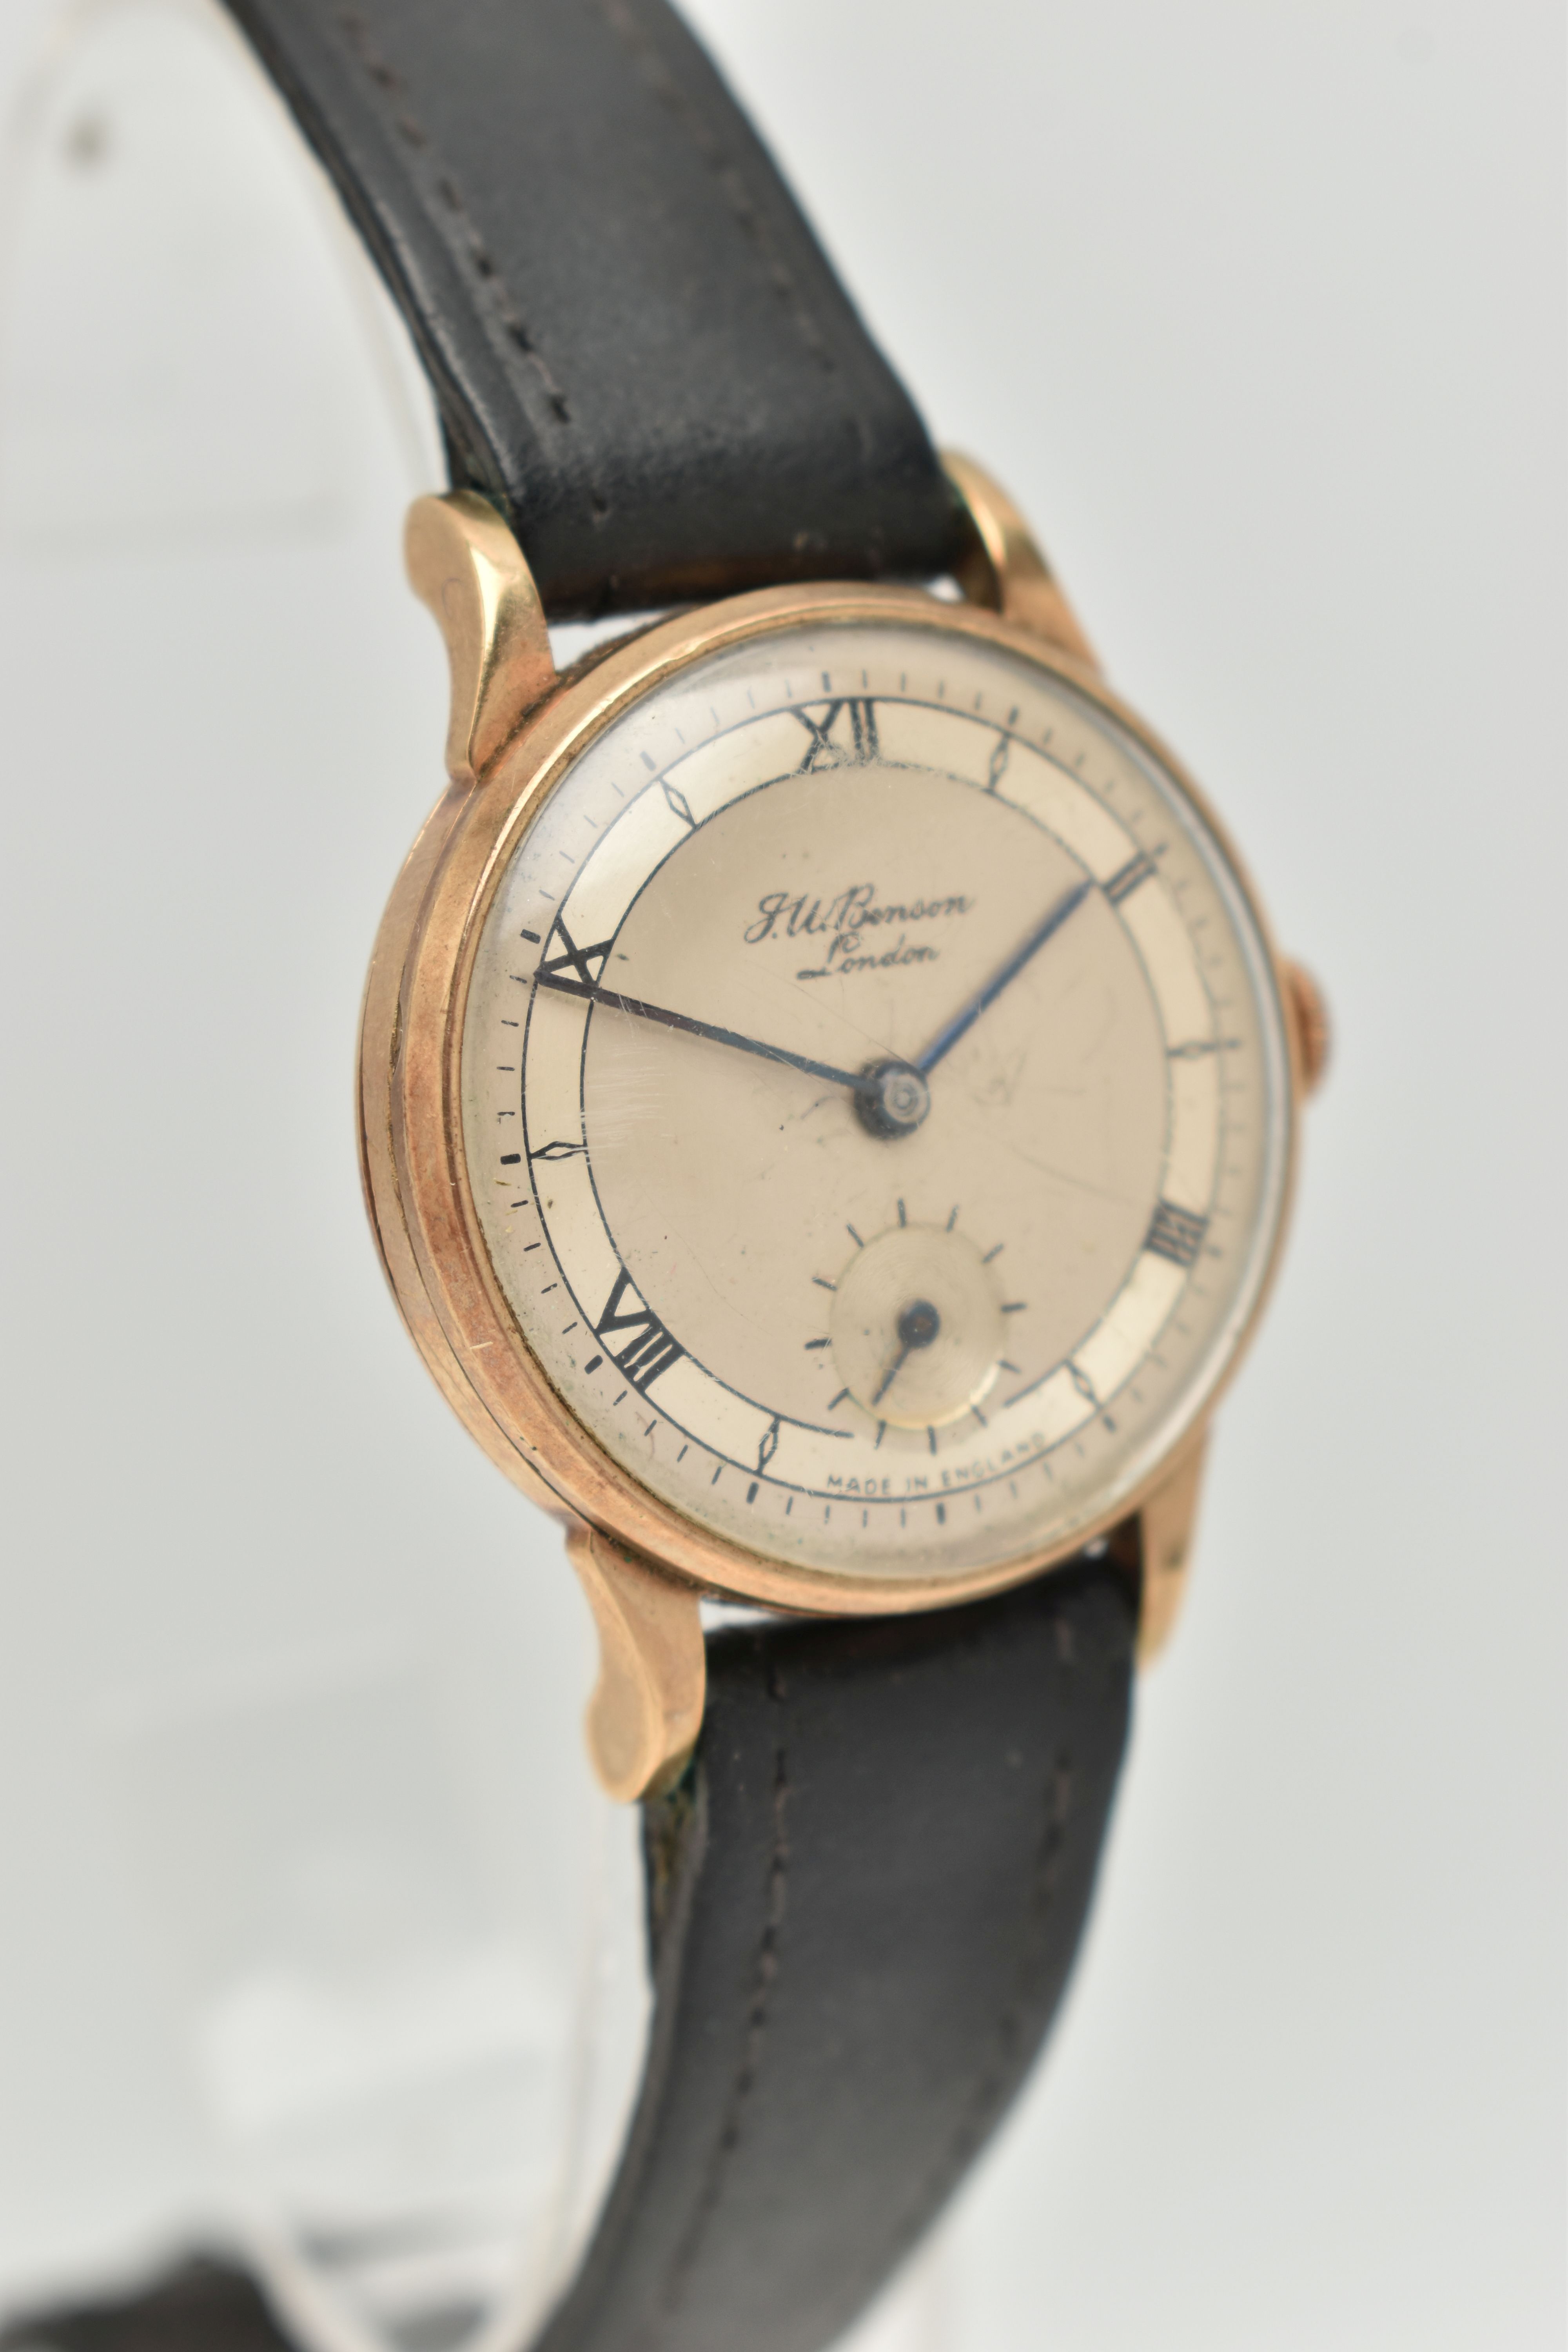 A GENTS 9CT GOLD 'J.W.BENSON' WRISTWATCH, manual wind, round silvered dial signed 'J.W.Benson - Image 2 of 6